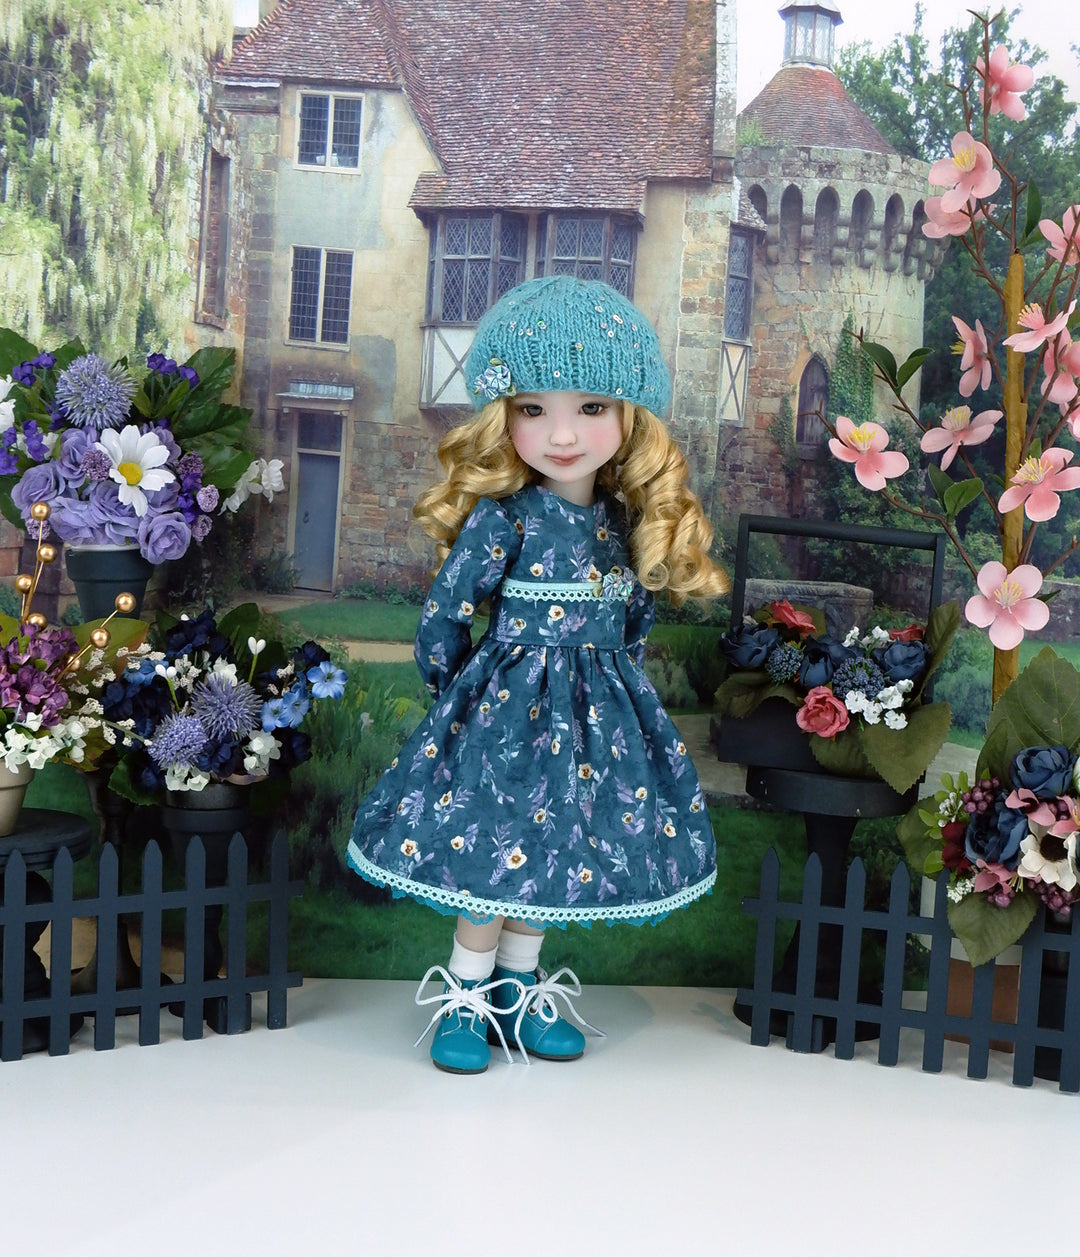 Wild Meadow Blooms - dress ensemble with boots for Ruby Red Fashion Friends doll